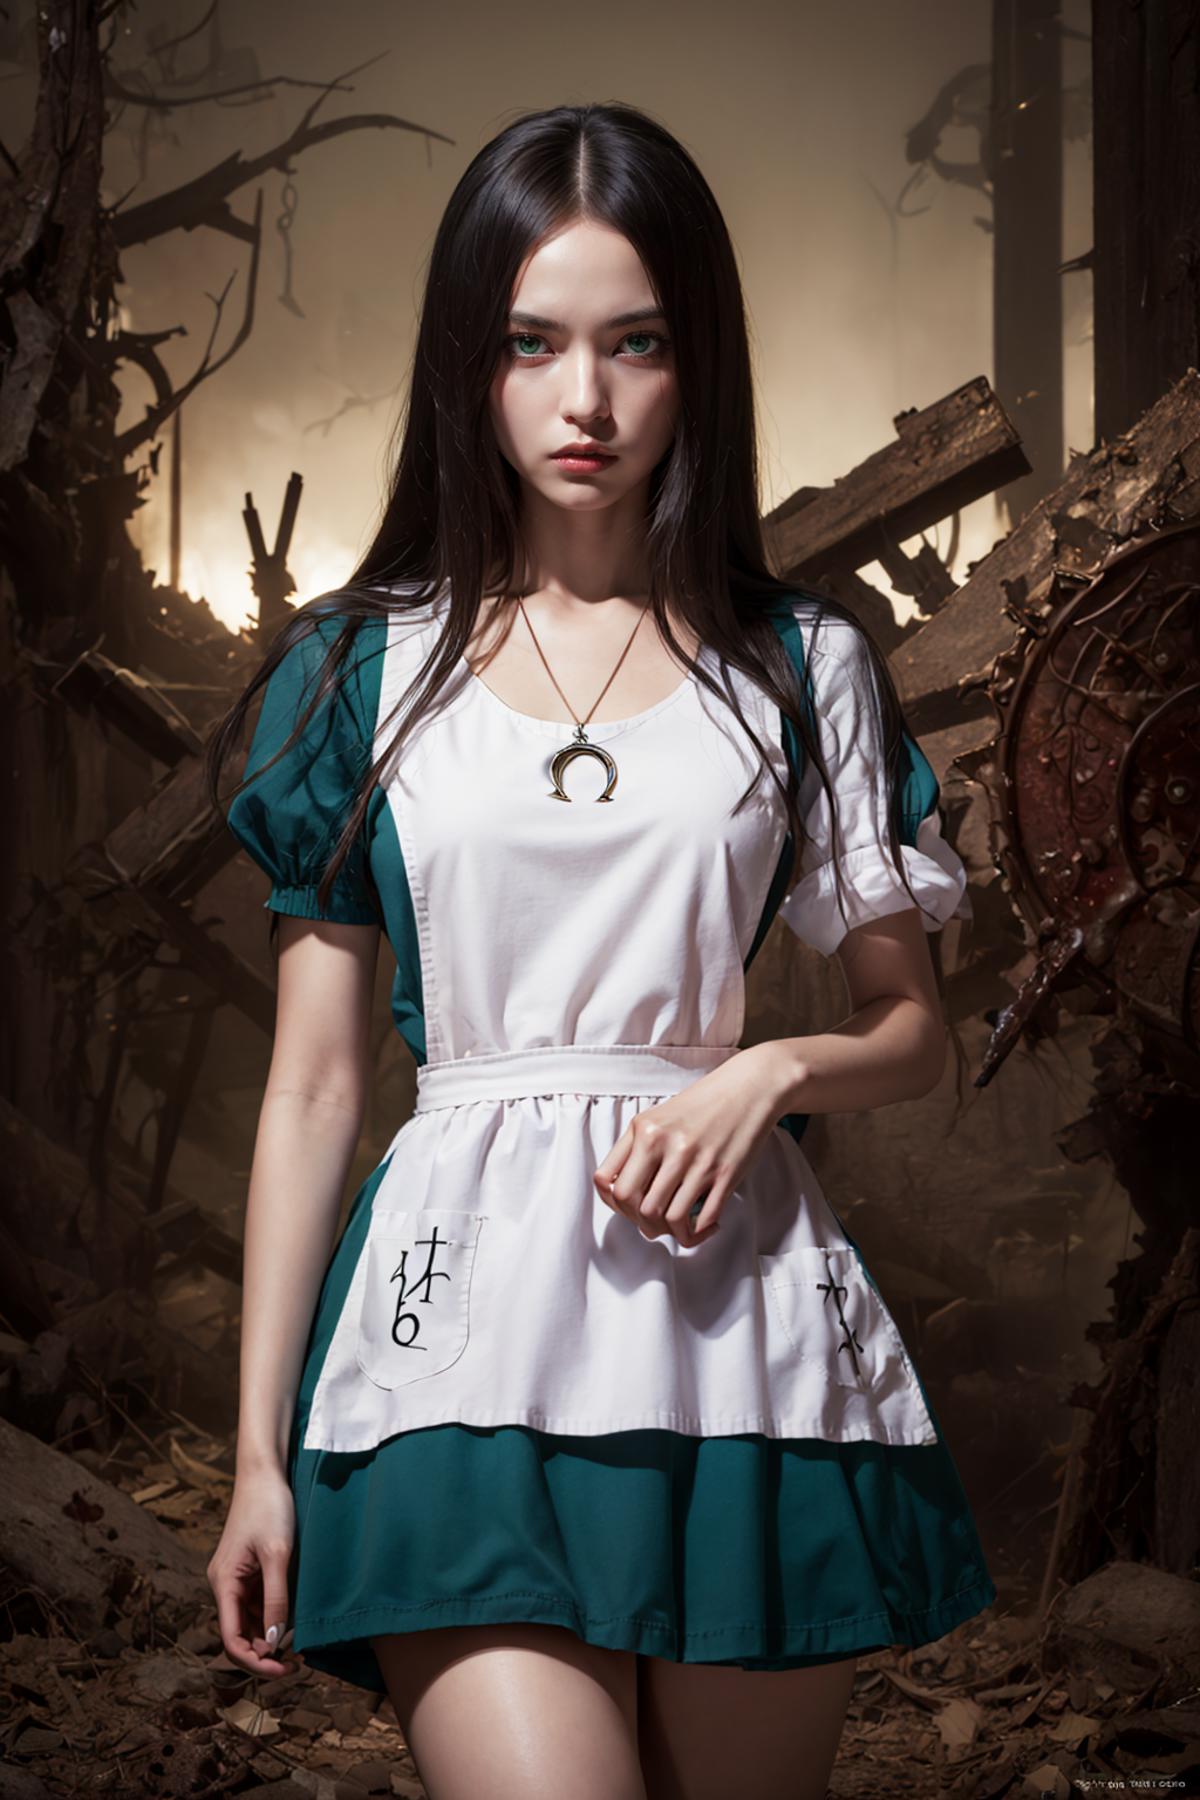 Alice Liddell | American McGee's Alice image by Tokugawa